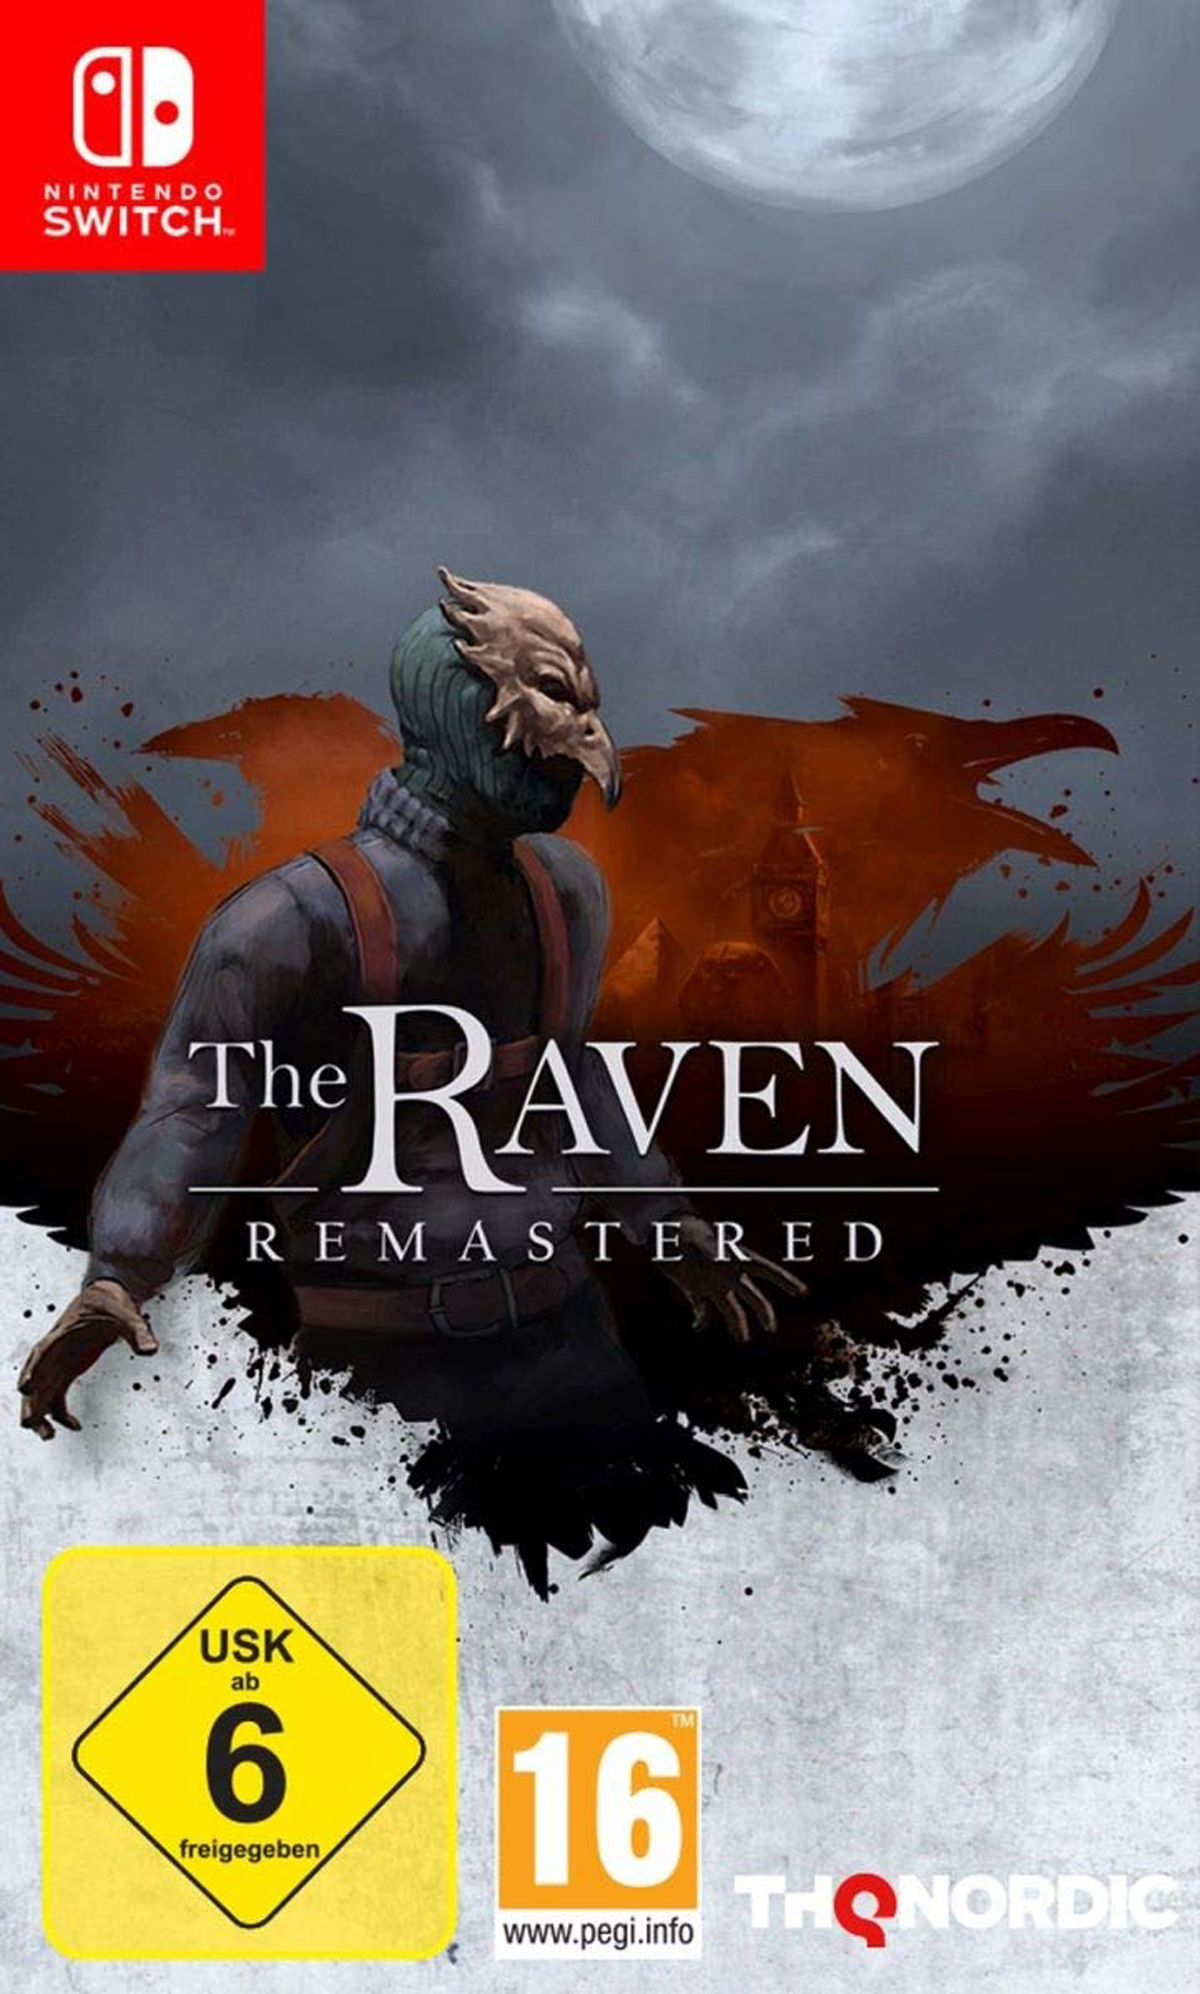 - Remastered - [Nintendo Switch] Raven The